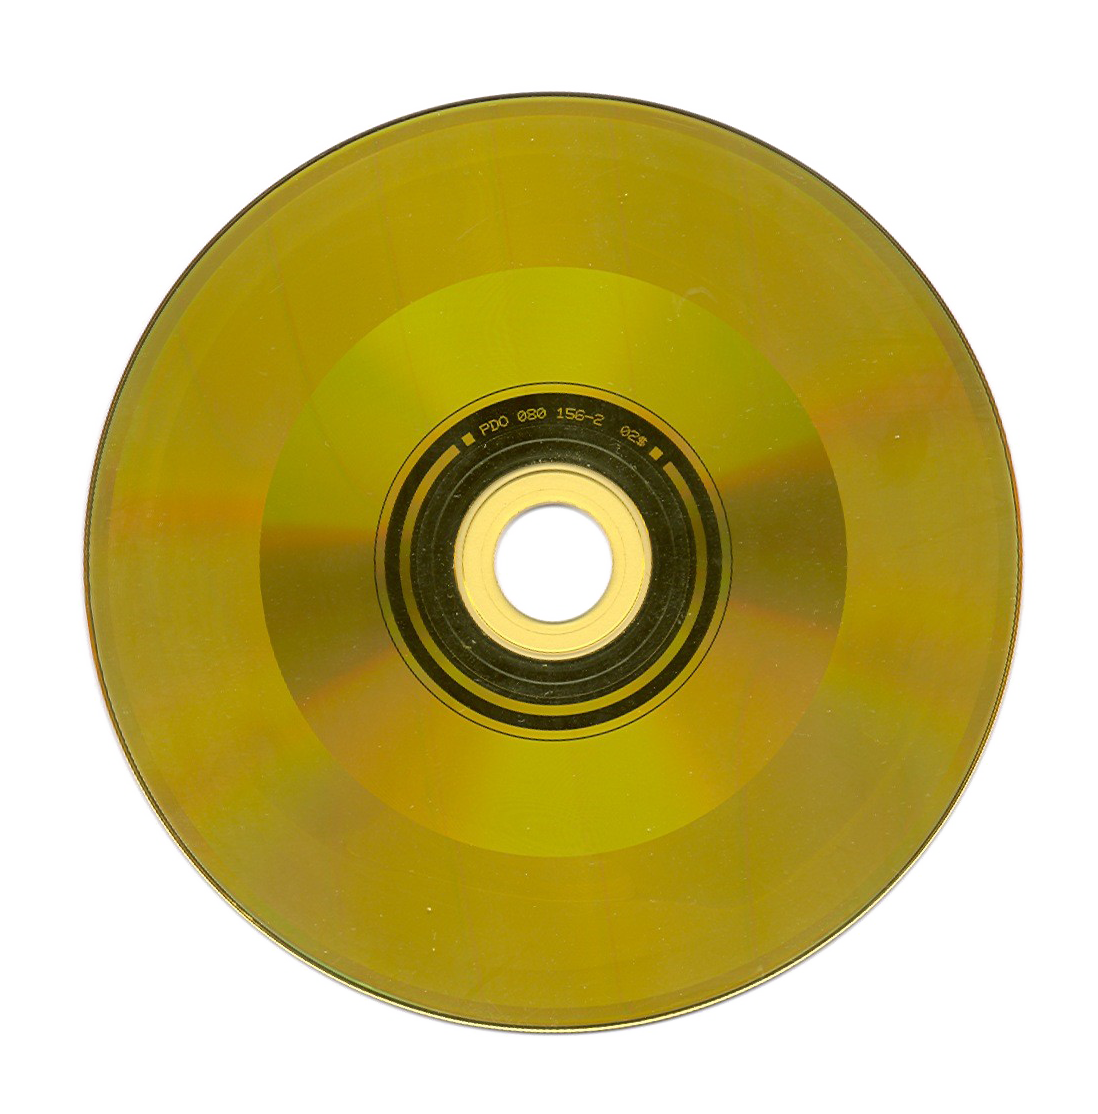 Yellow Compact Disk PNG Image in Transparent pngteam.com